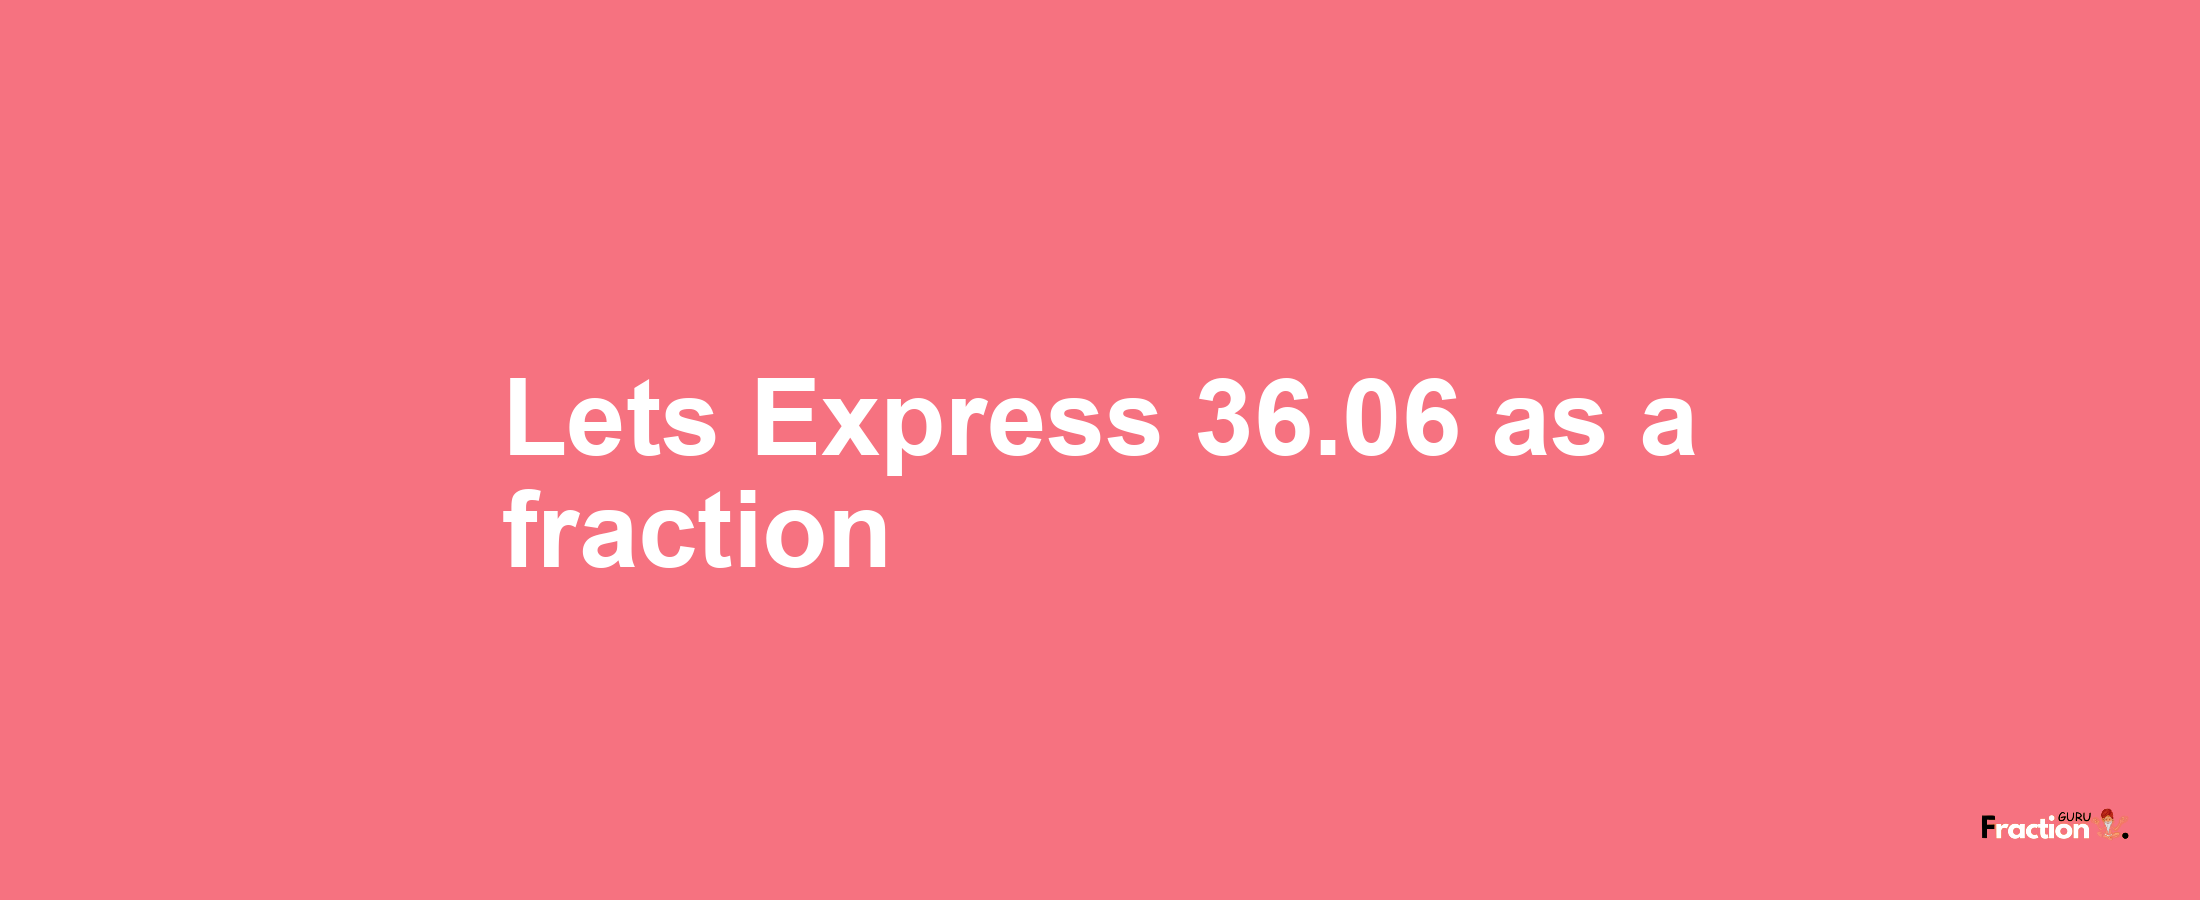 Lets Express 36.06 as afraction